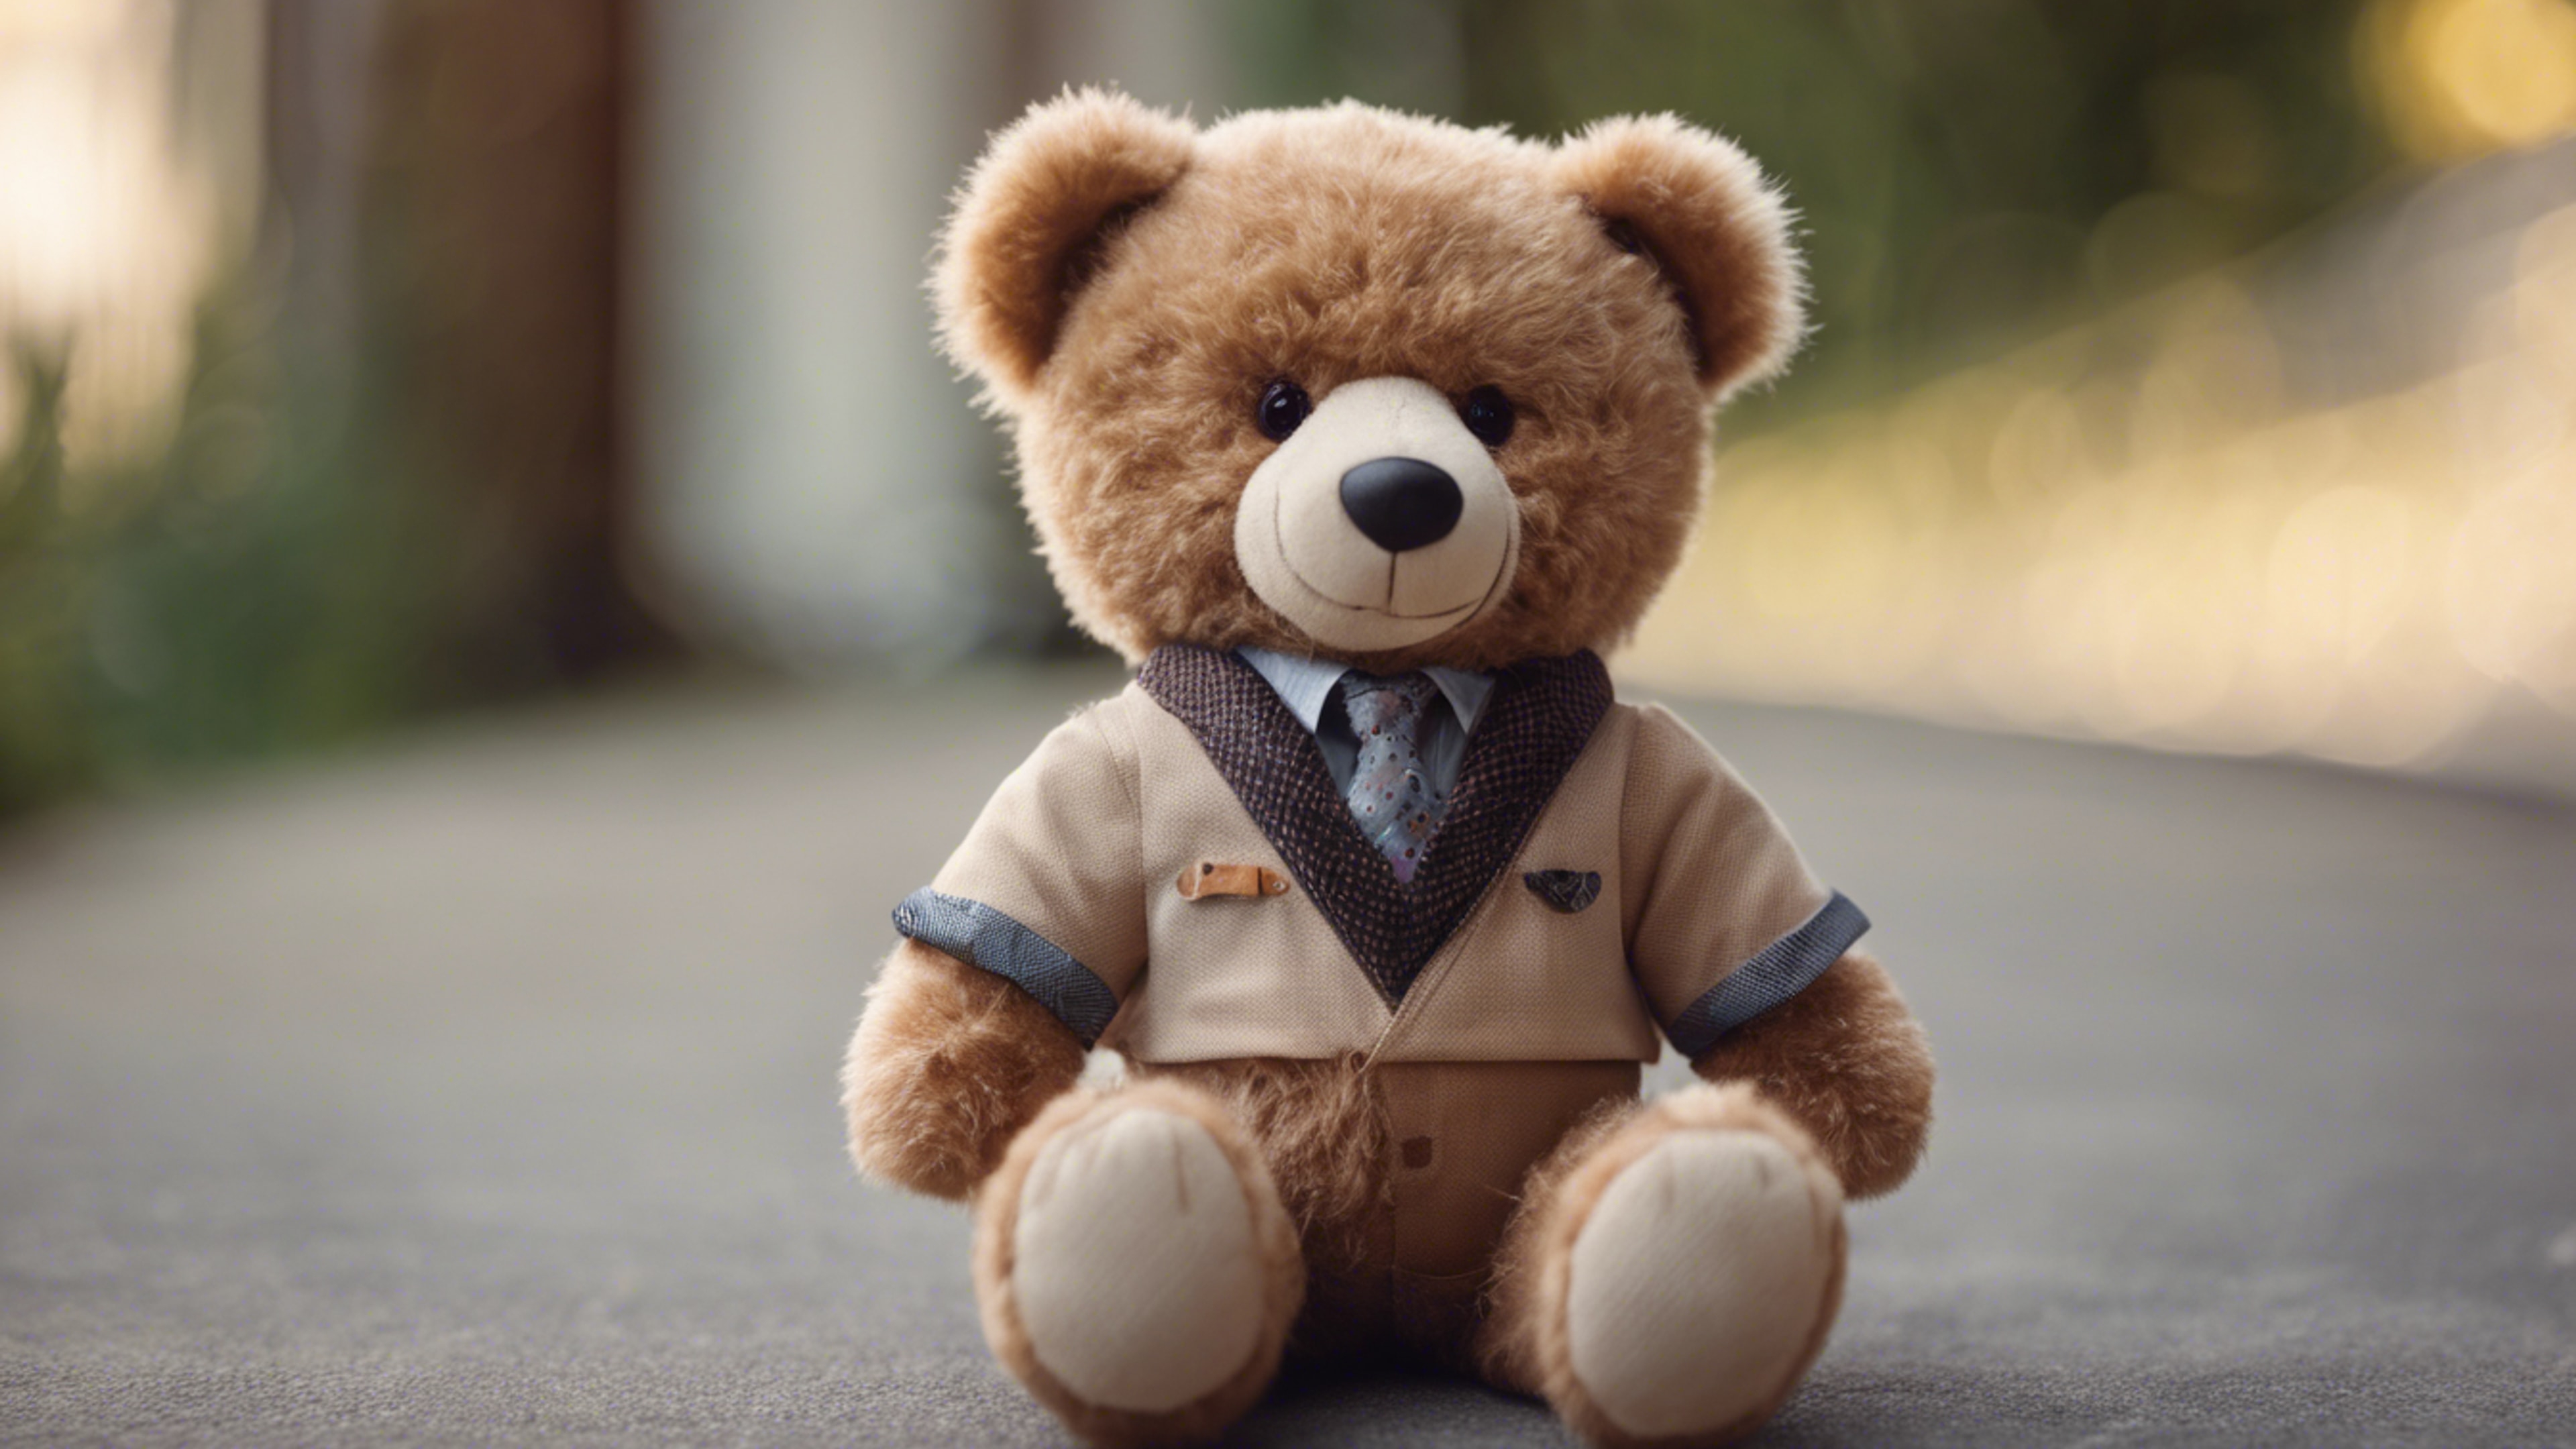 A teddy bear with light brown fur wearing a preppy outfit. Ταπετσαρία[c4dfc3c378844a52a1e6]